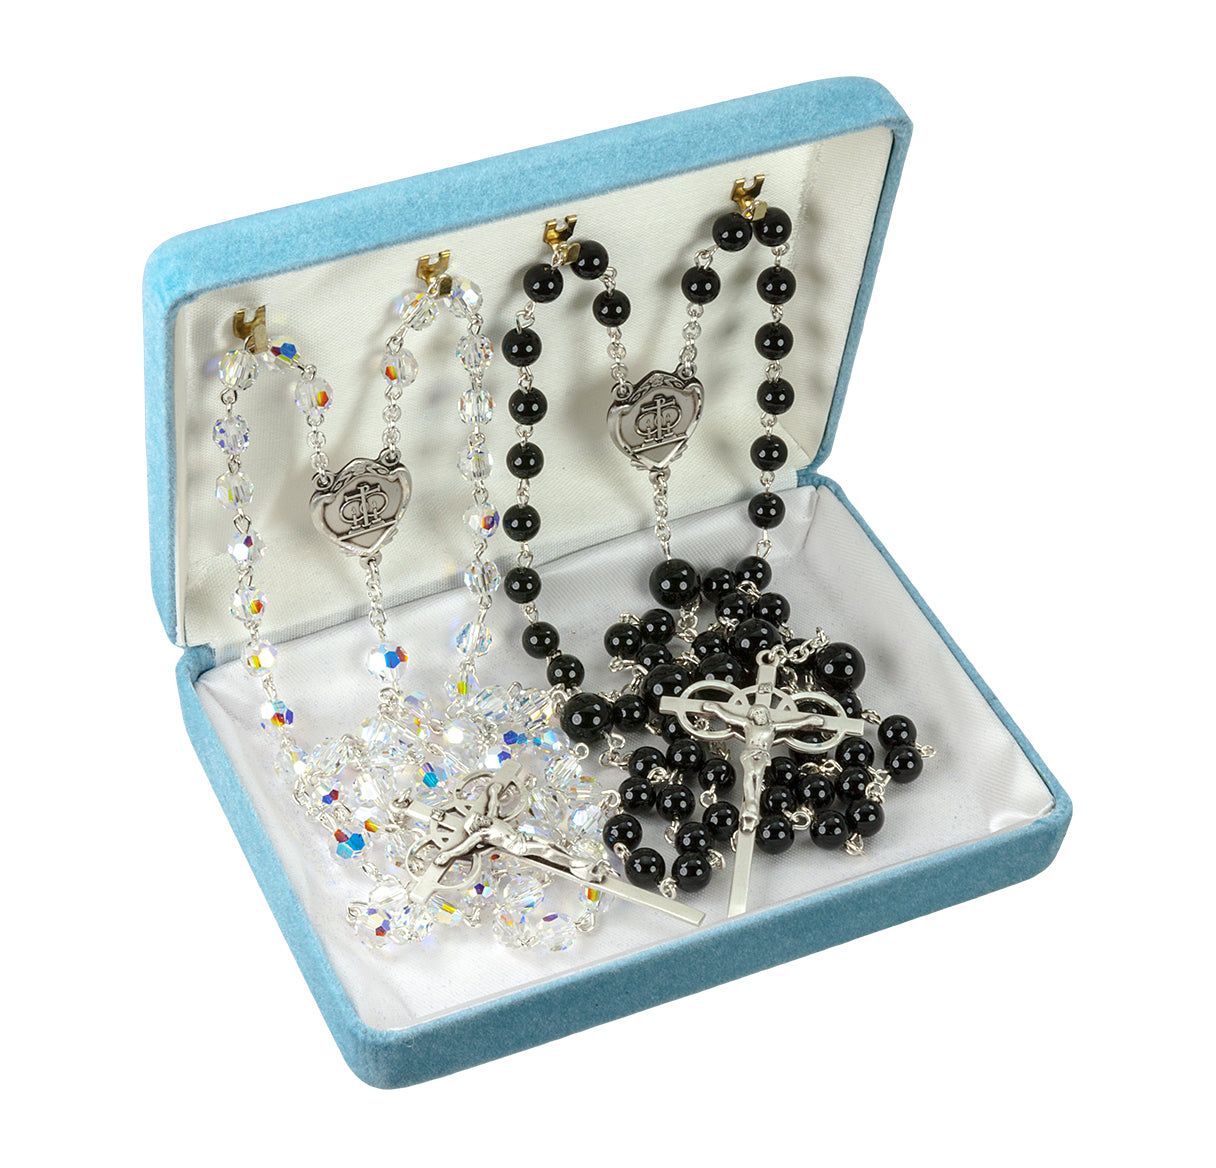 Wedding Rosary Sterling Crucifix and Centerpiece Set Created with Swarovski Crystal 6mm Aurora Borealis Beads and 6mm Onyx Beads by HMH